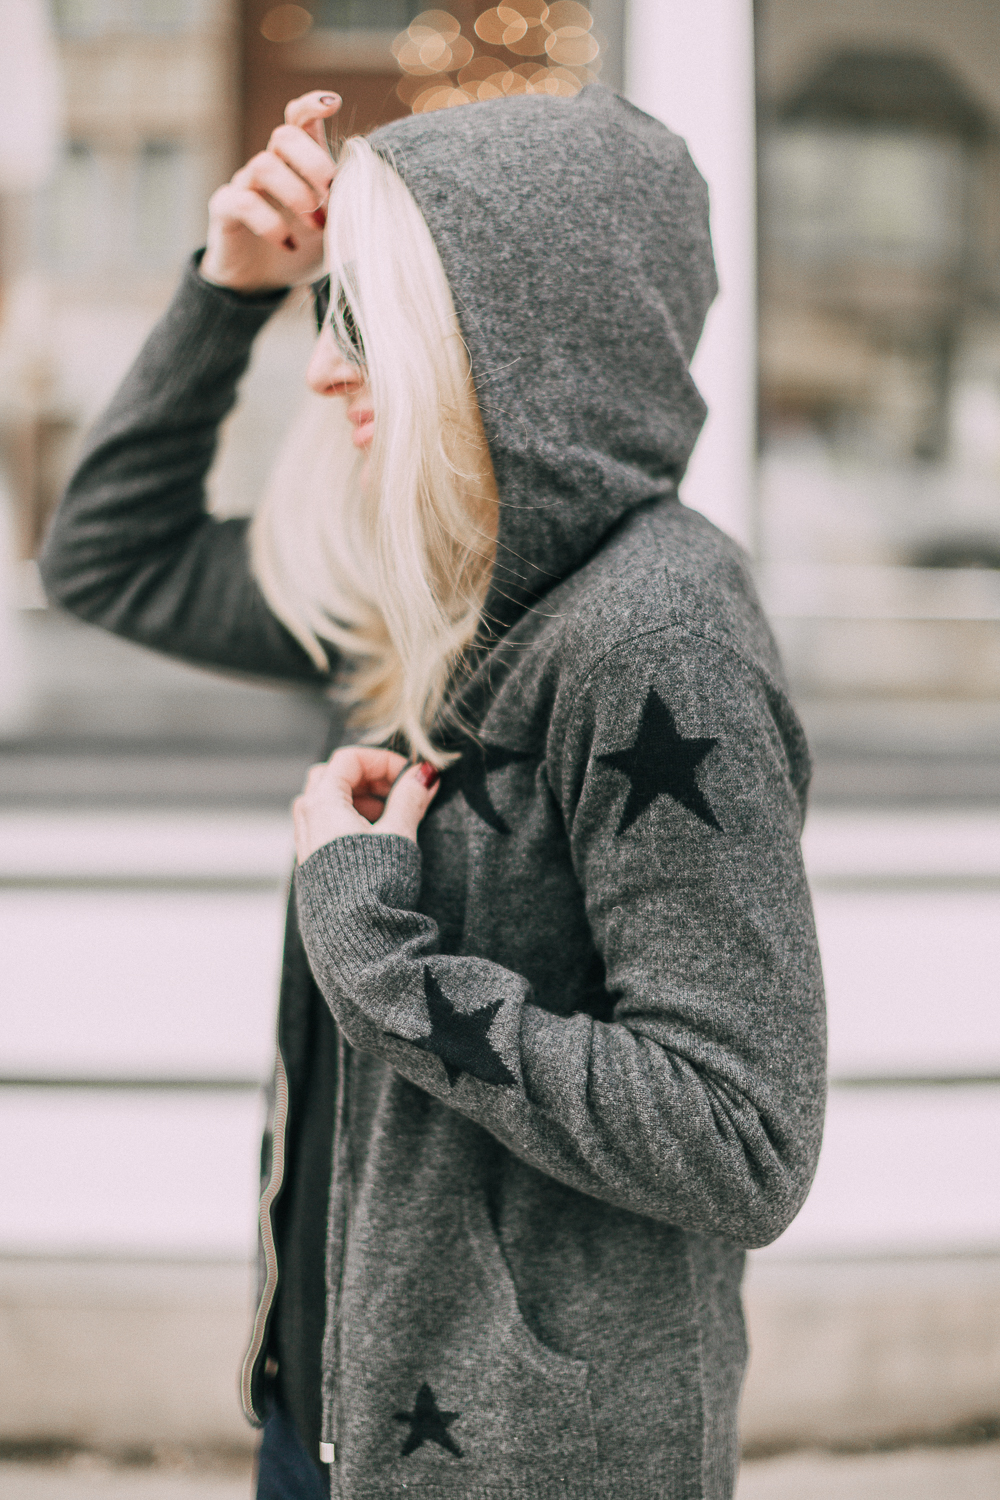 wardrobe staples your closet needs including a black cashmere crewneck sweater and high rise dark wash skinny jeans both from Walmart paired with a cashmere star hoodie and scrunch sneaker boots